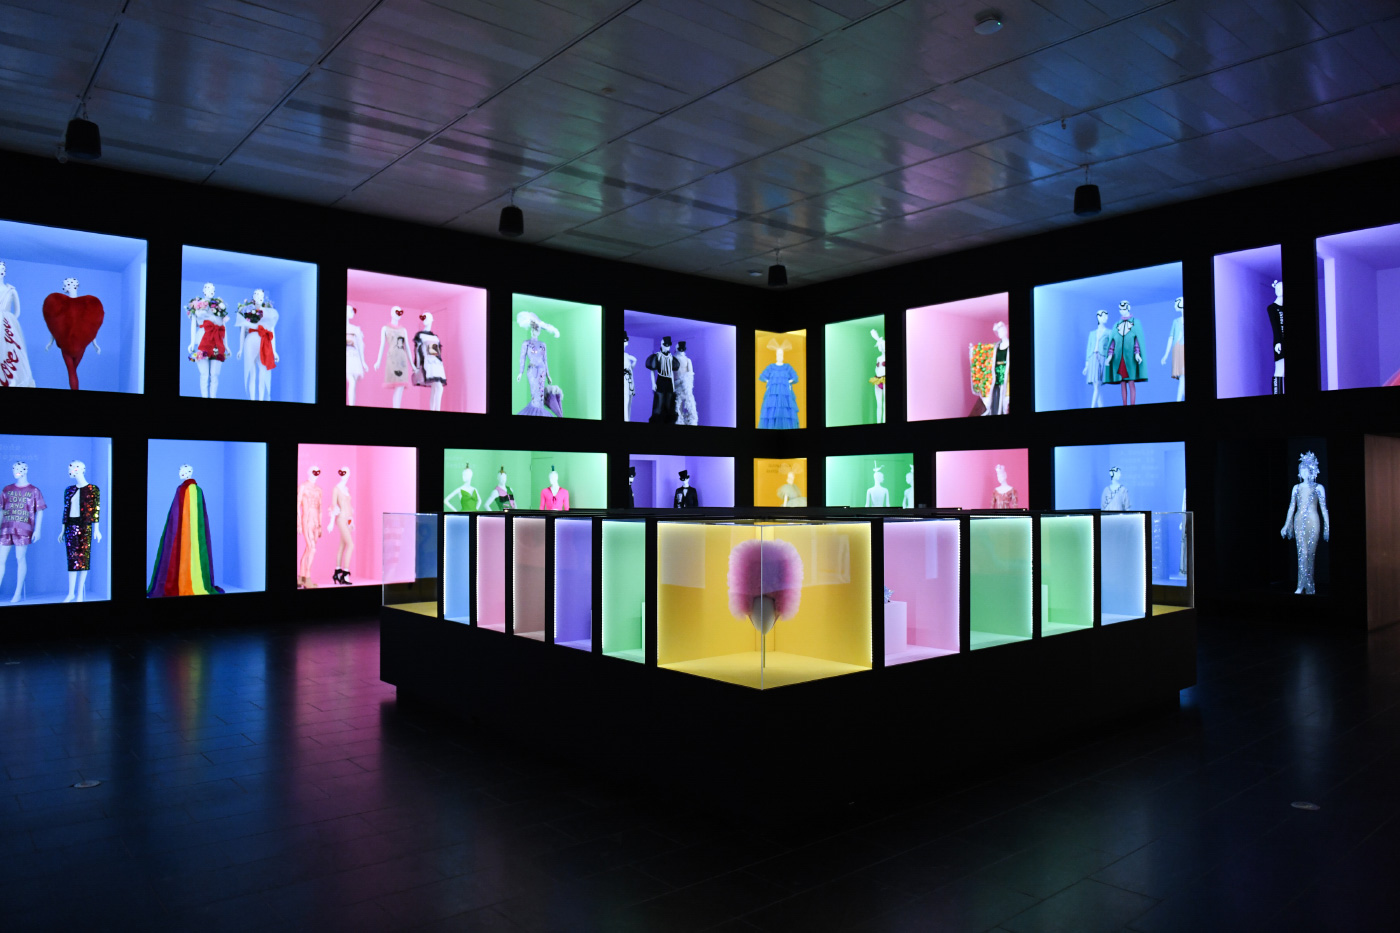 A blackened room with different colored boxes, each containing dresses, masks, and industrial design items